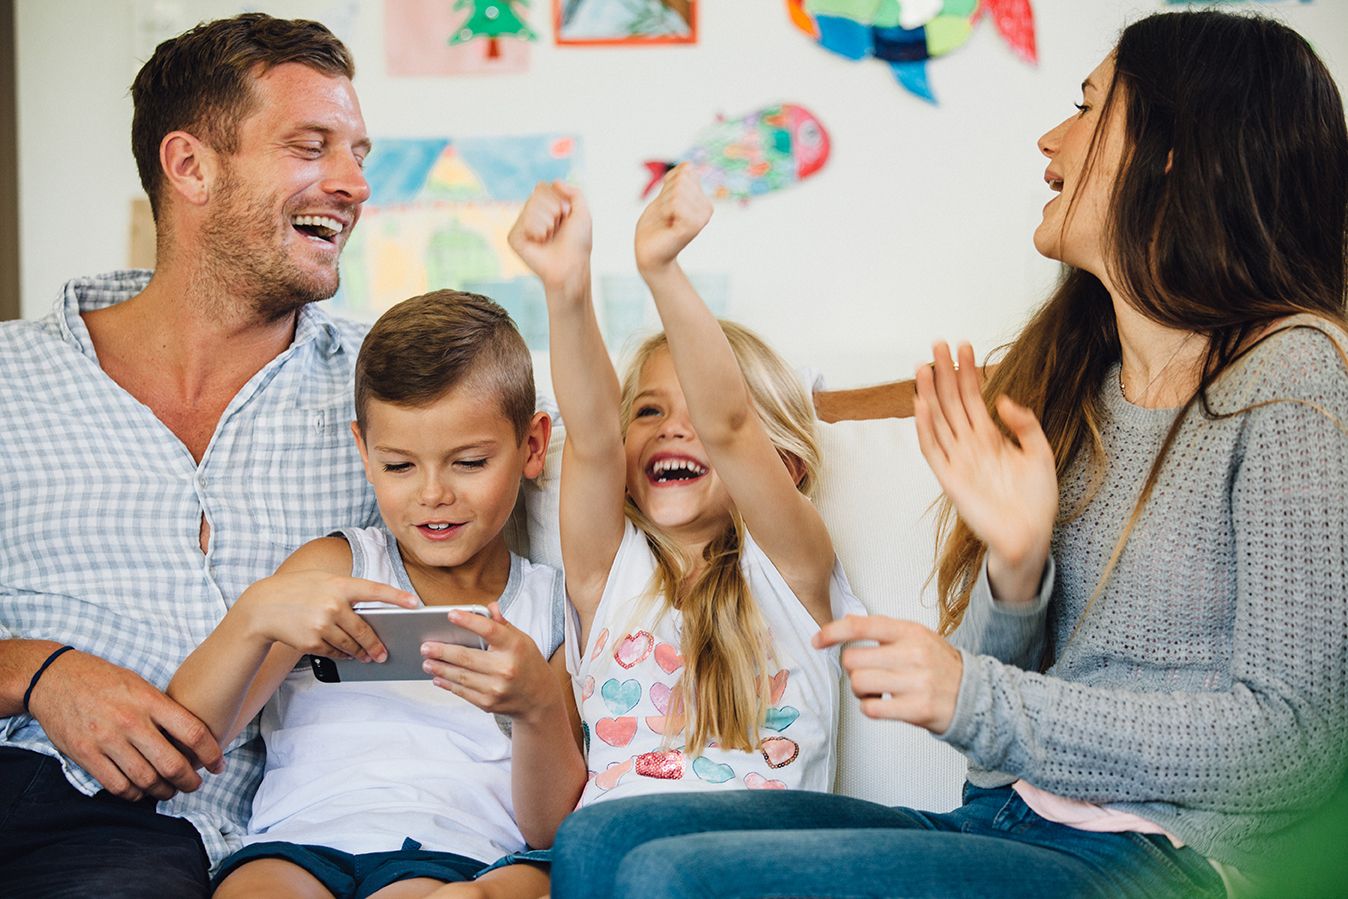 12 Virtual Family Games To Play With Loved Ones - STATIONERS